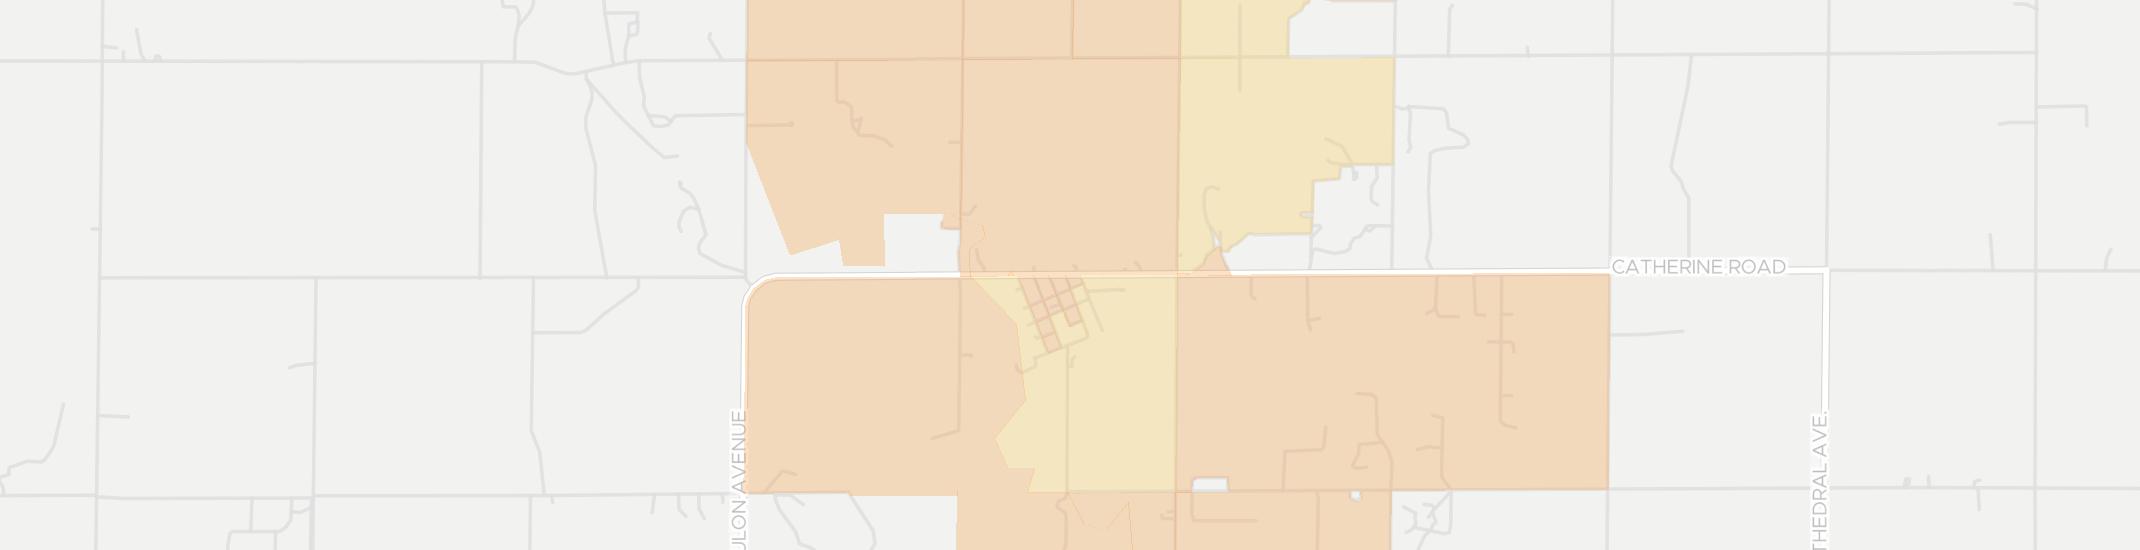 Catharine Internet Competition Map. Click for interactive map.